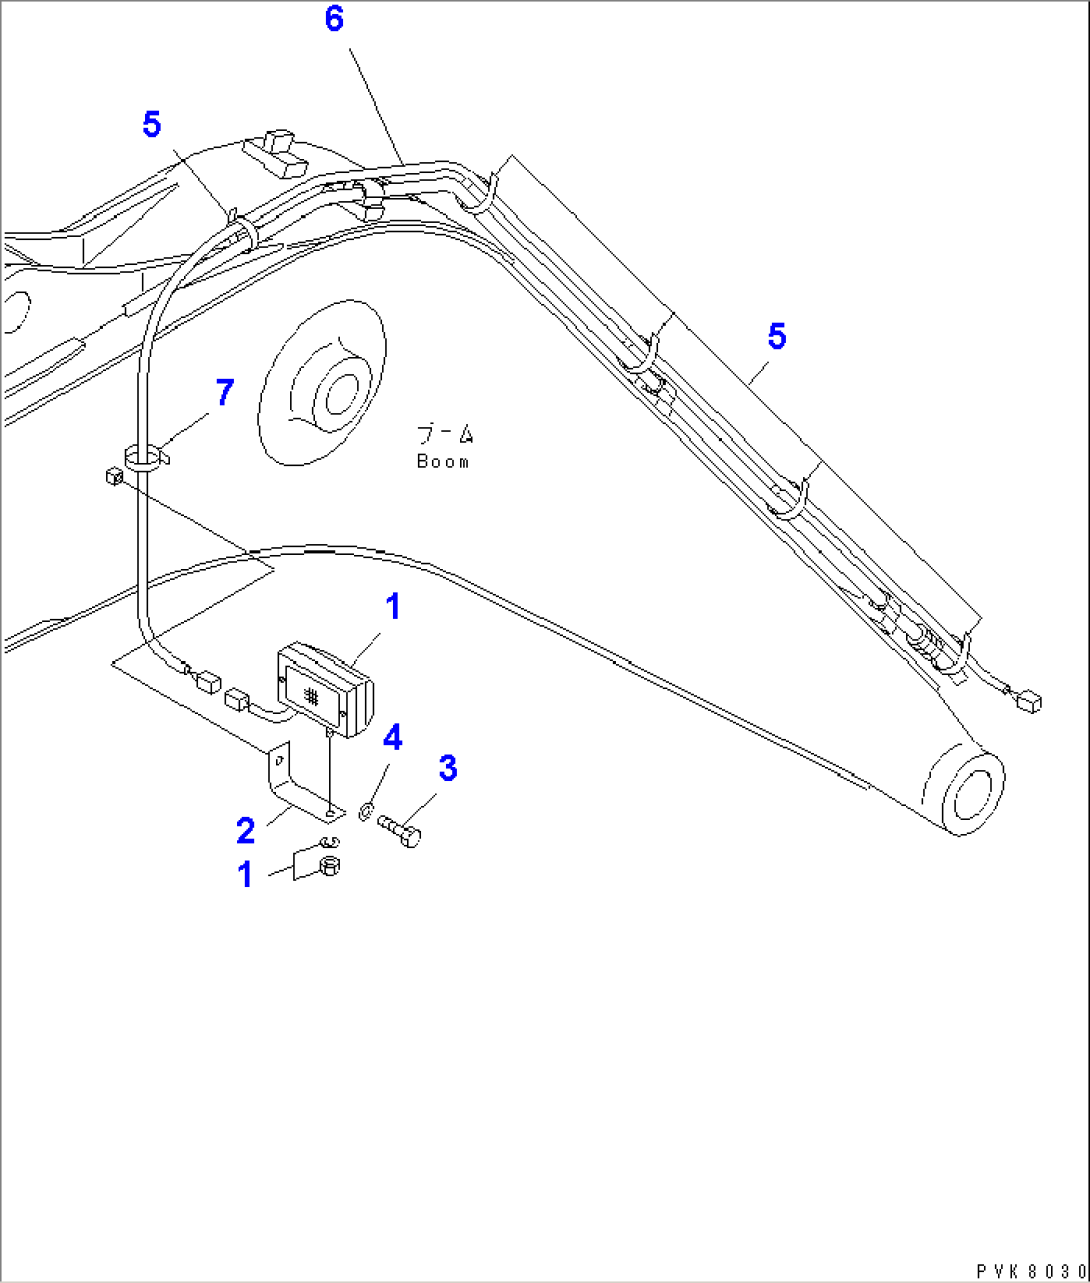 WIRING (FRONT WORK LAMP)